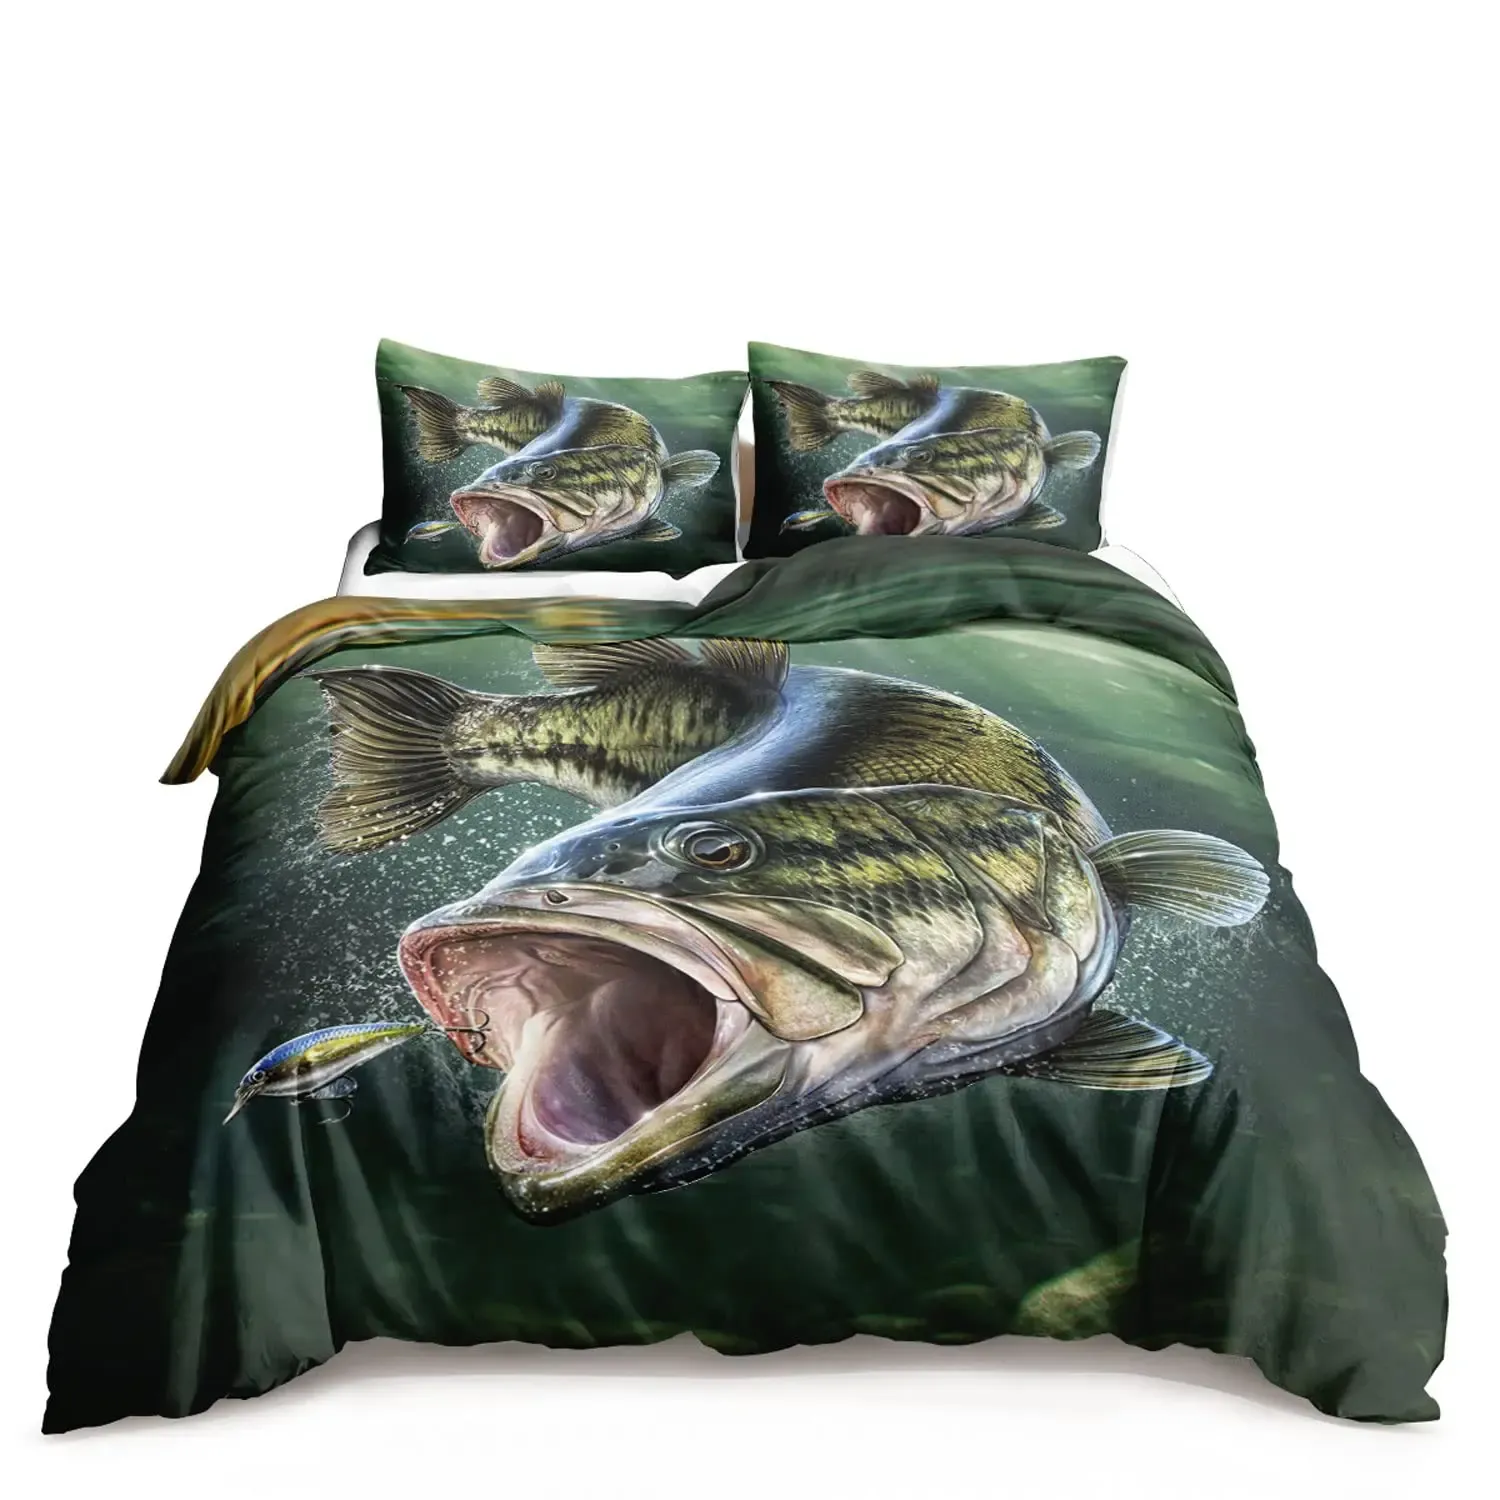 Accessories Pike Fish Bedding Striped Bass Big Pattern Hunting and Fishing Themed Duvet Cover for Kids Boys BedRoom Decorations for Teens